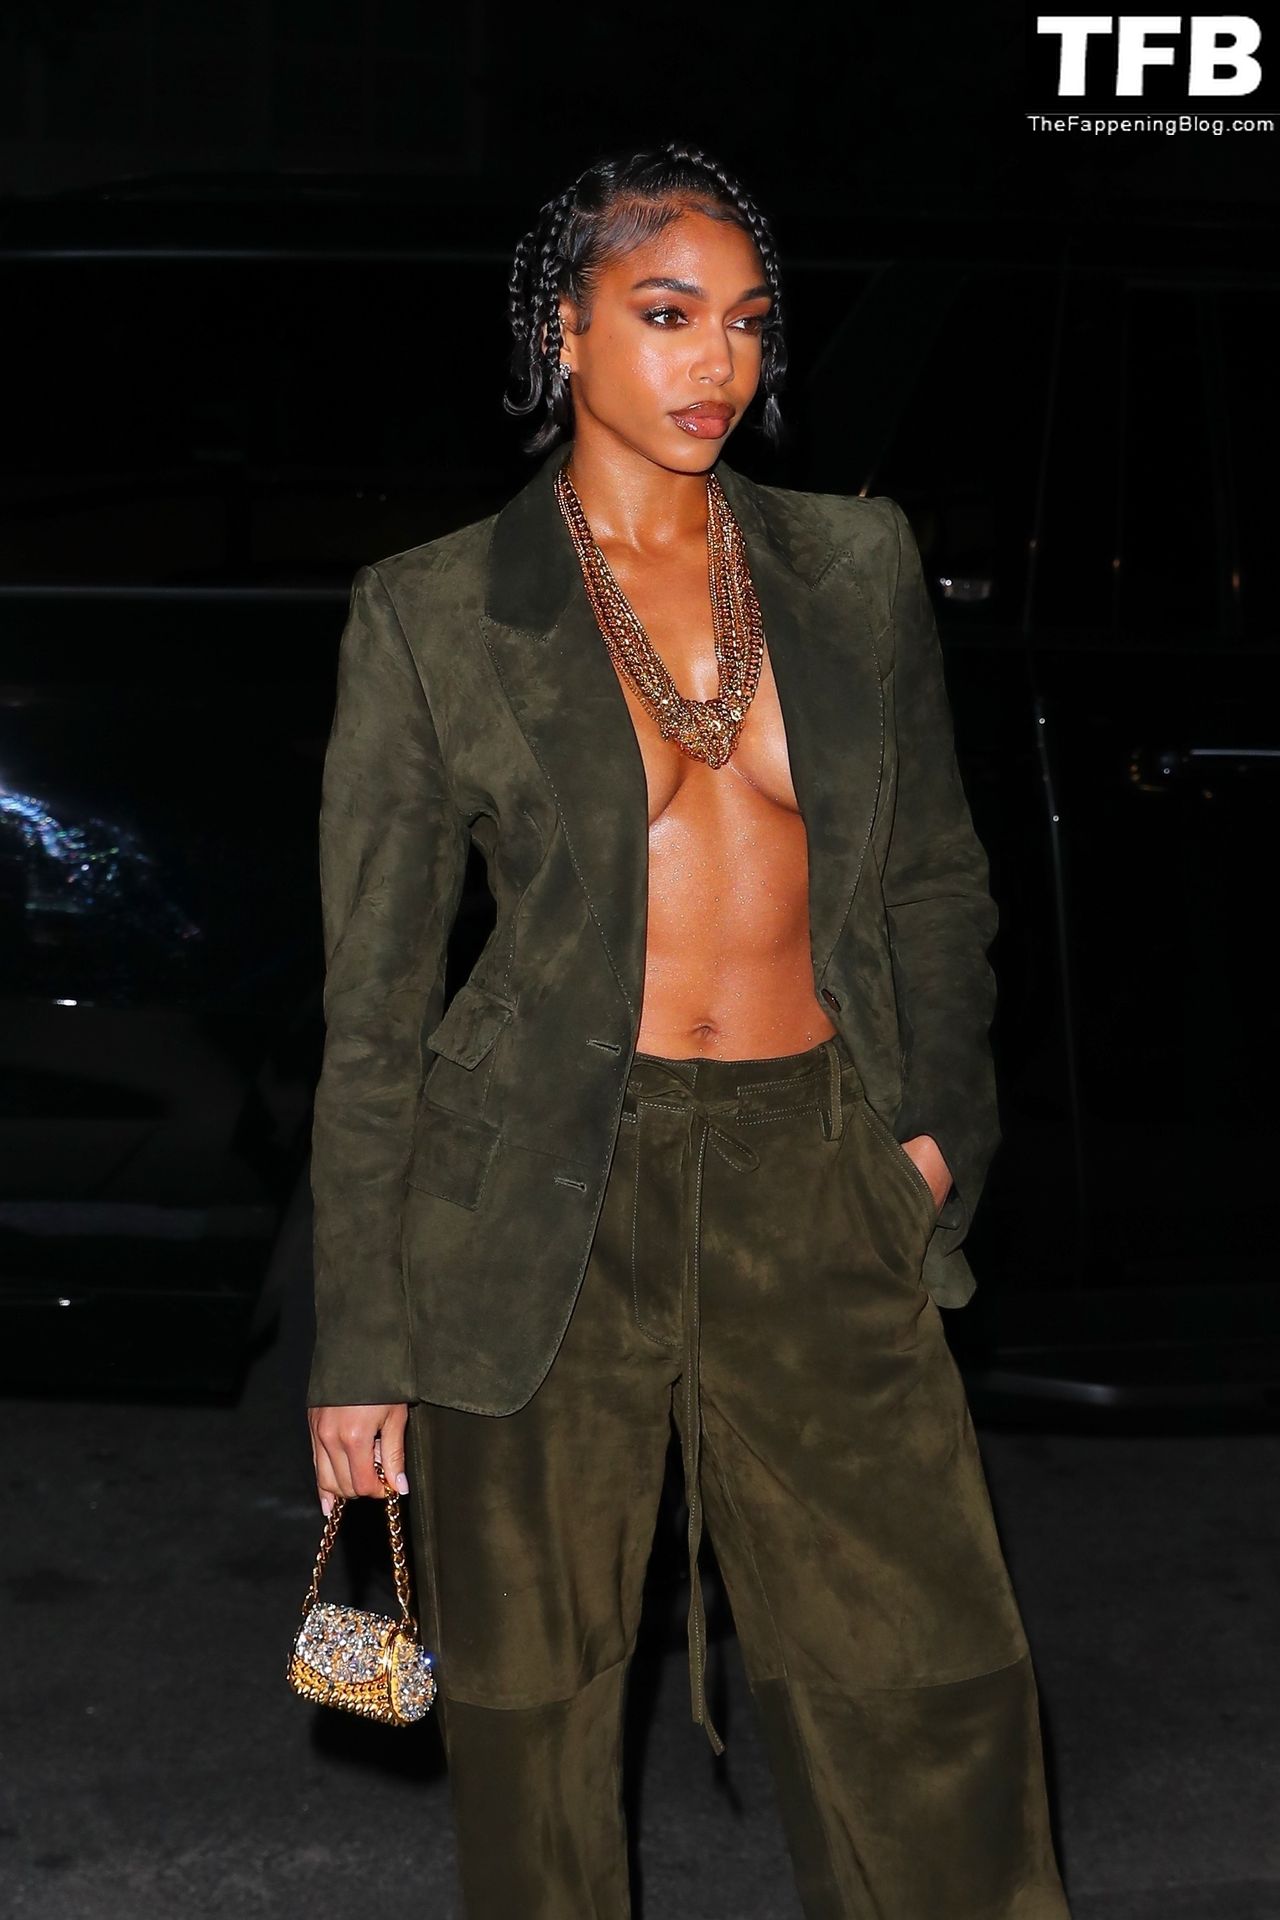 Lori Harvey Sexy The Fappening Blog 21 - Lori Harvey Shows Off Her Tits at the Tom Ford Fashion Show (38 Photos)